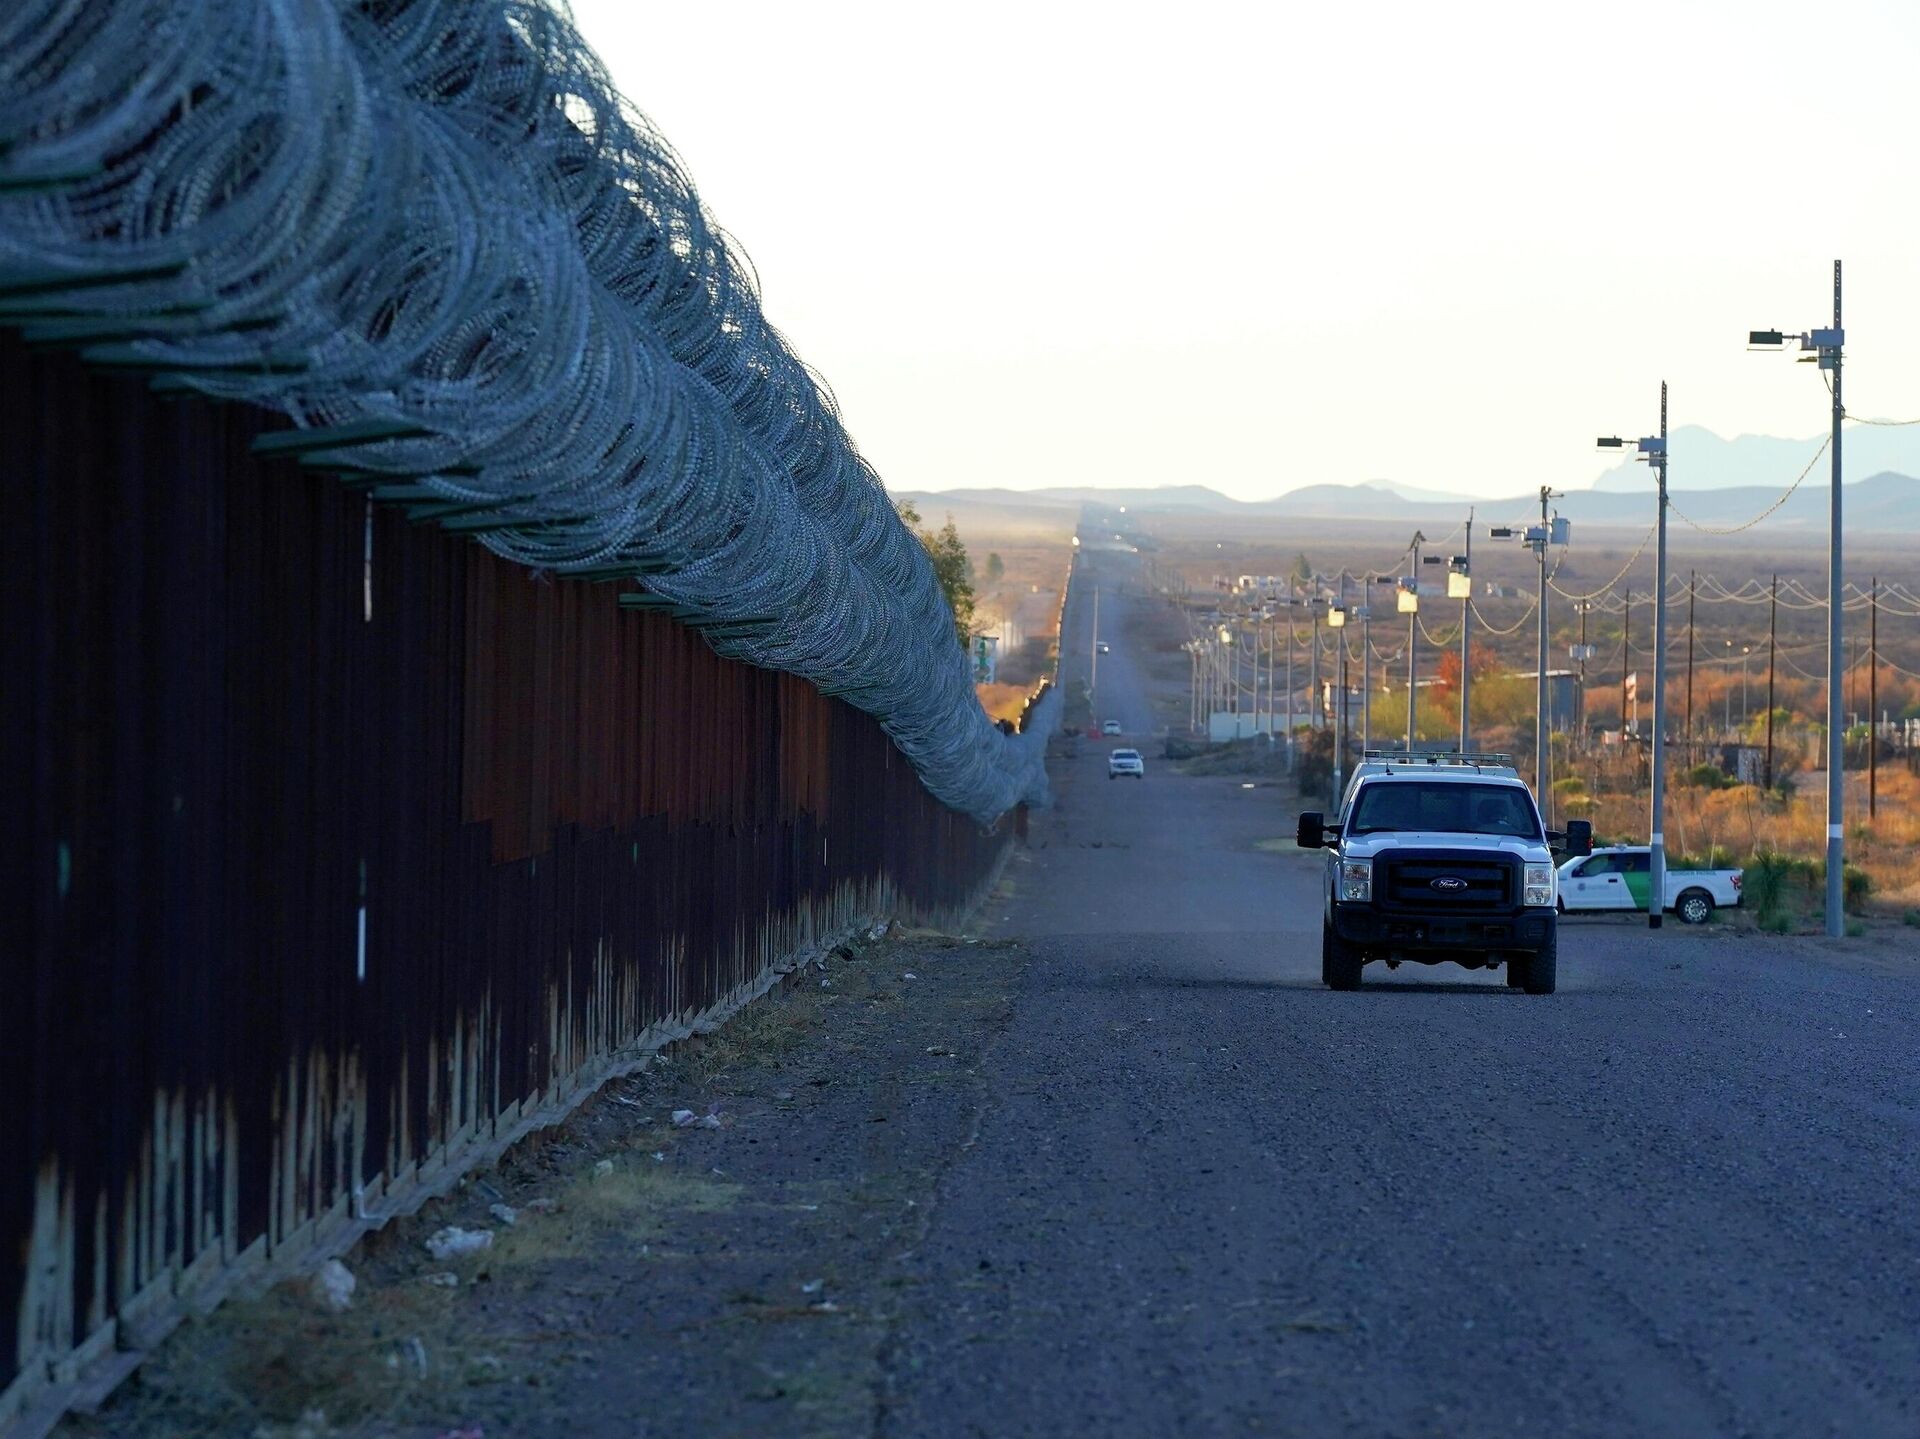 US-Mexico border is world's deadliest land migration route, IOM